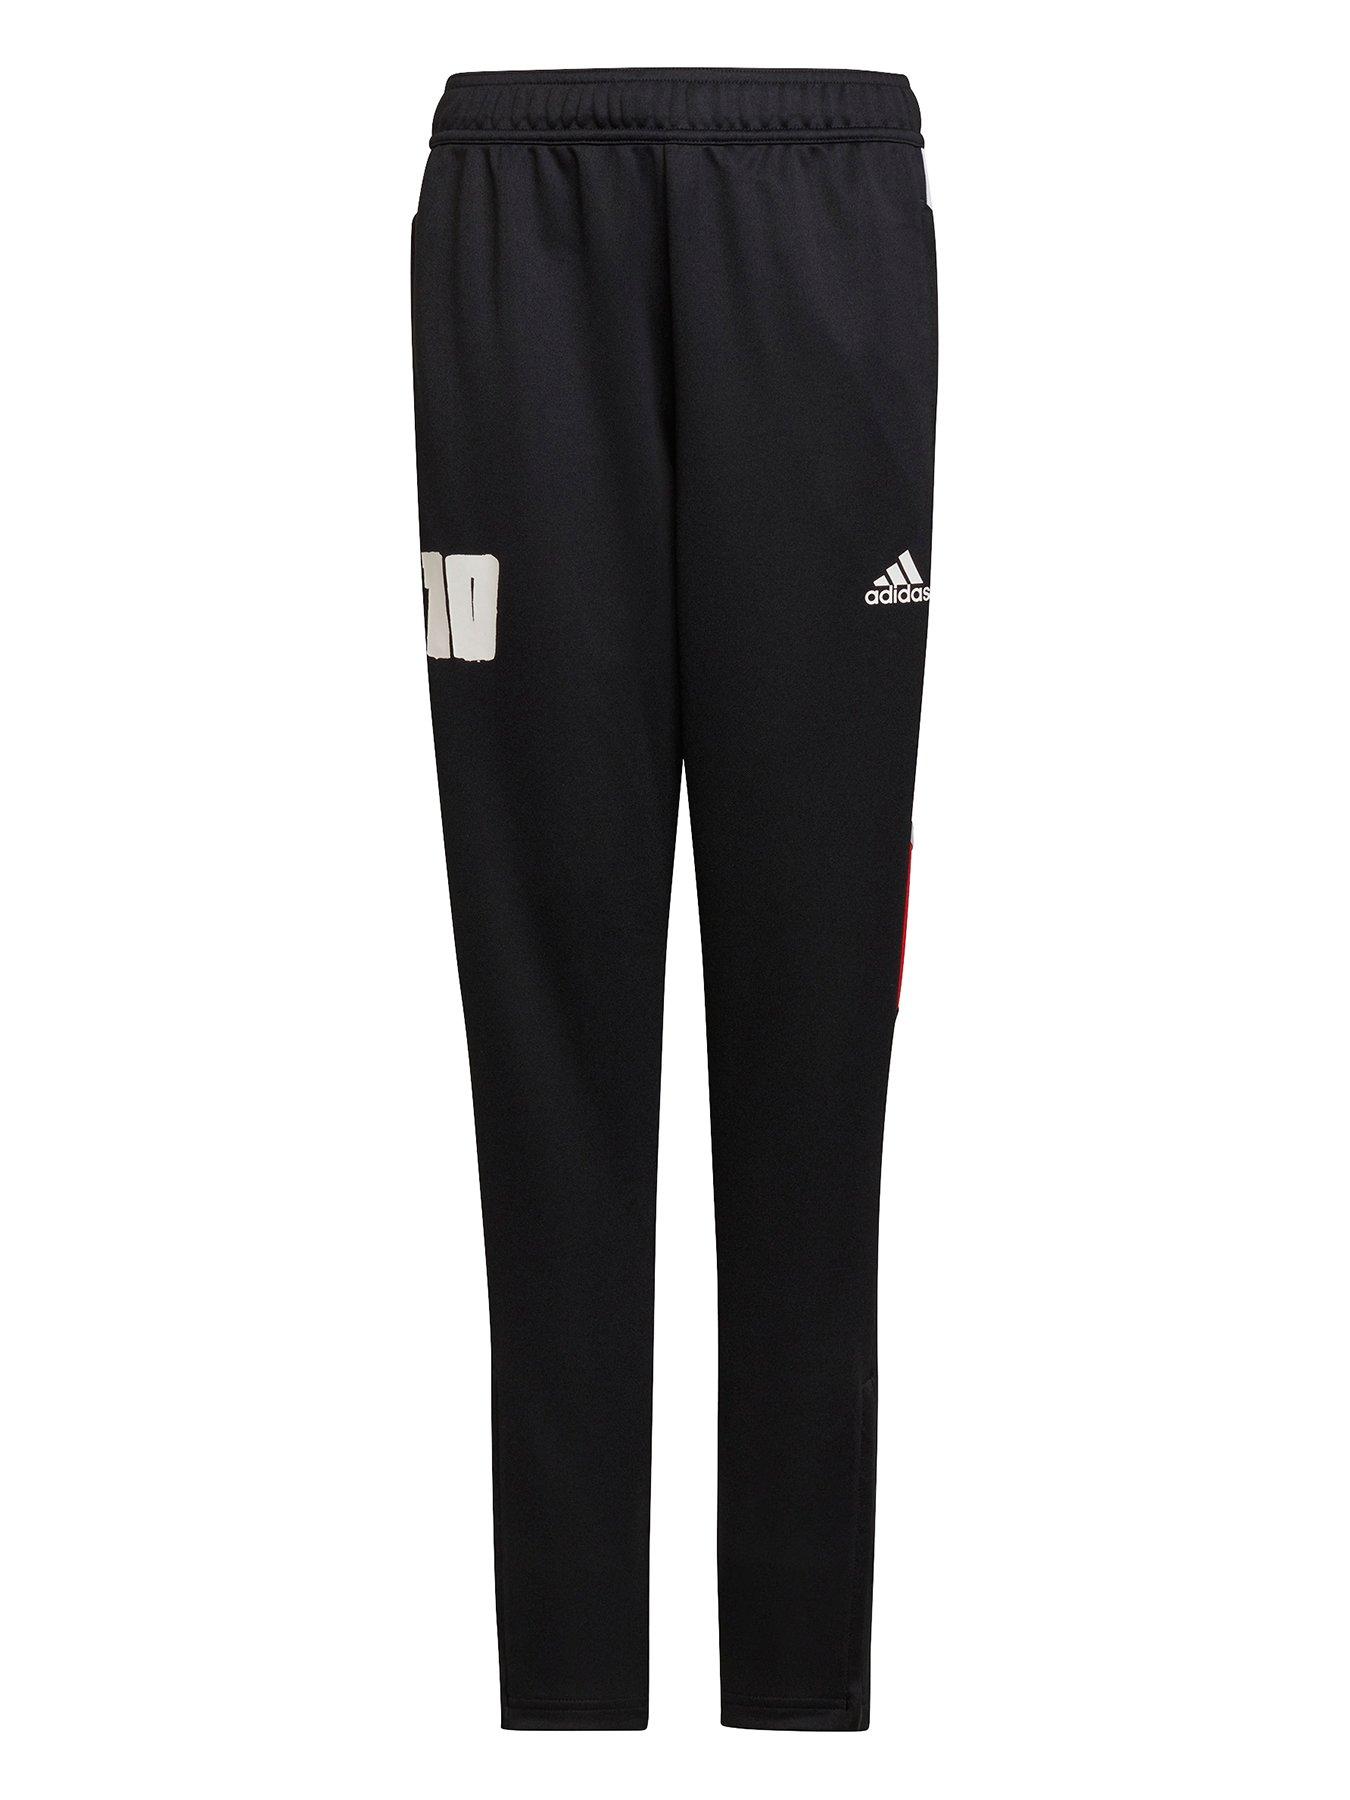 adidas Messi 10 Junior Track Pants - Black/Red | very.co.uk